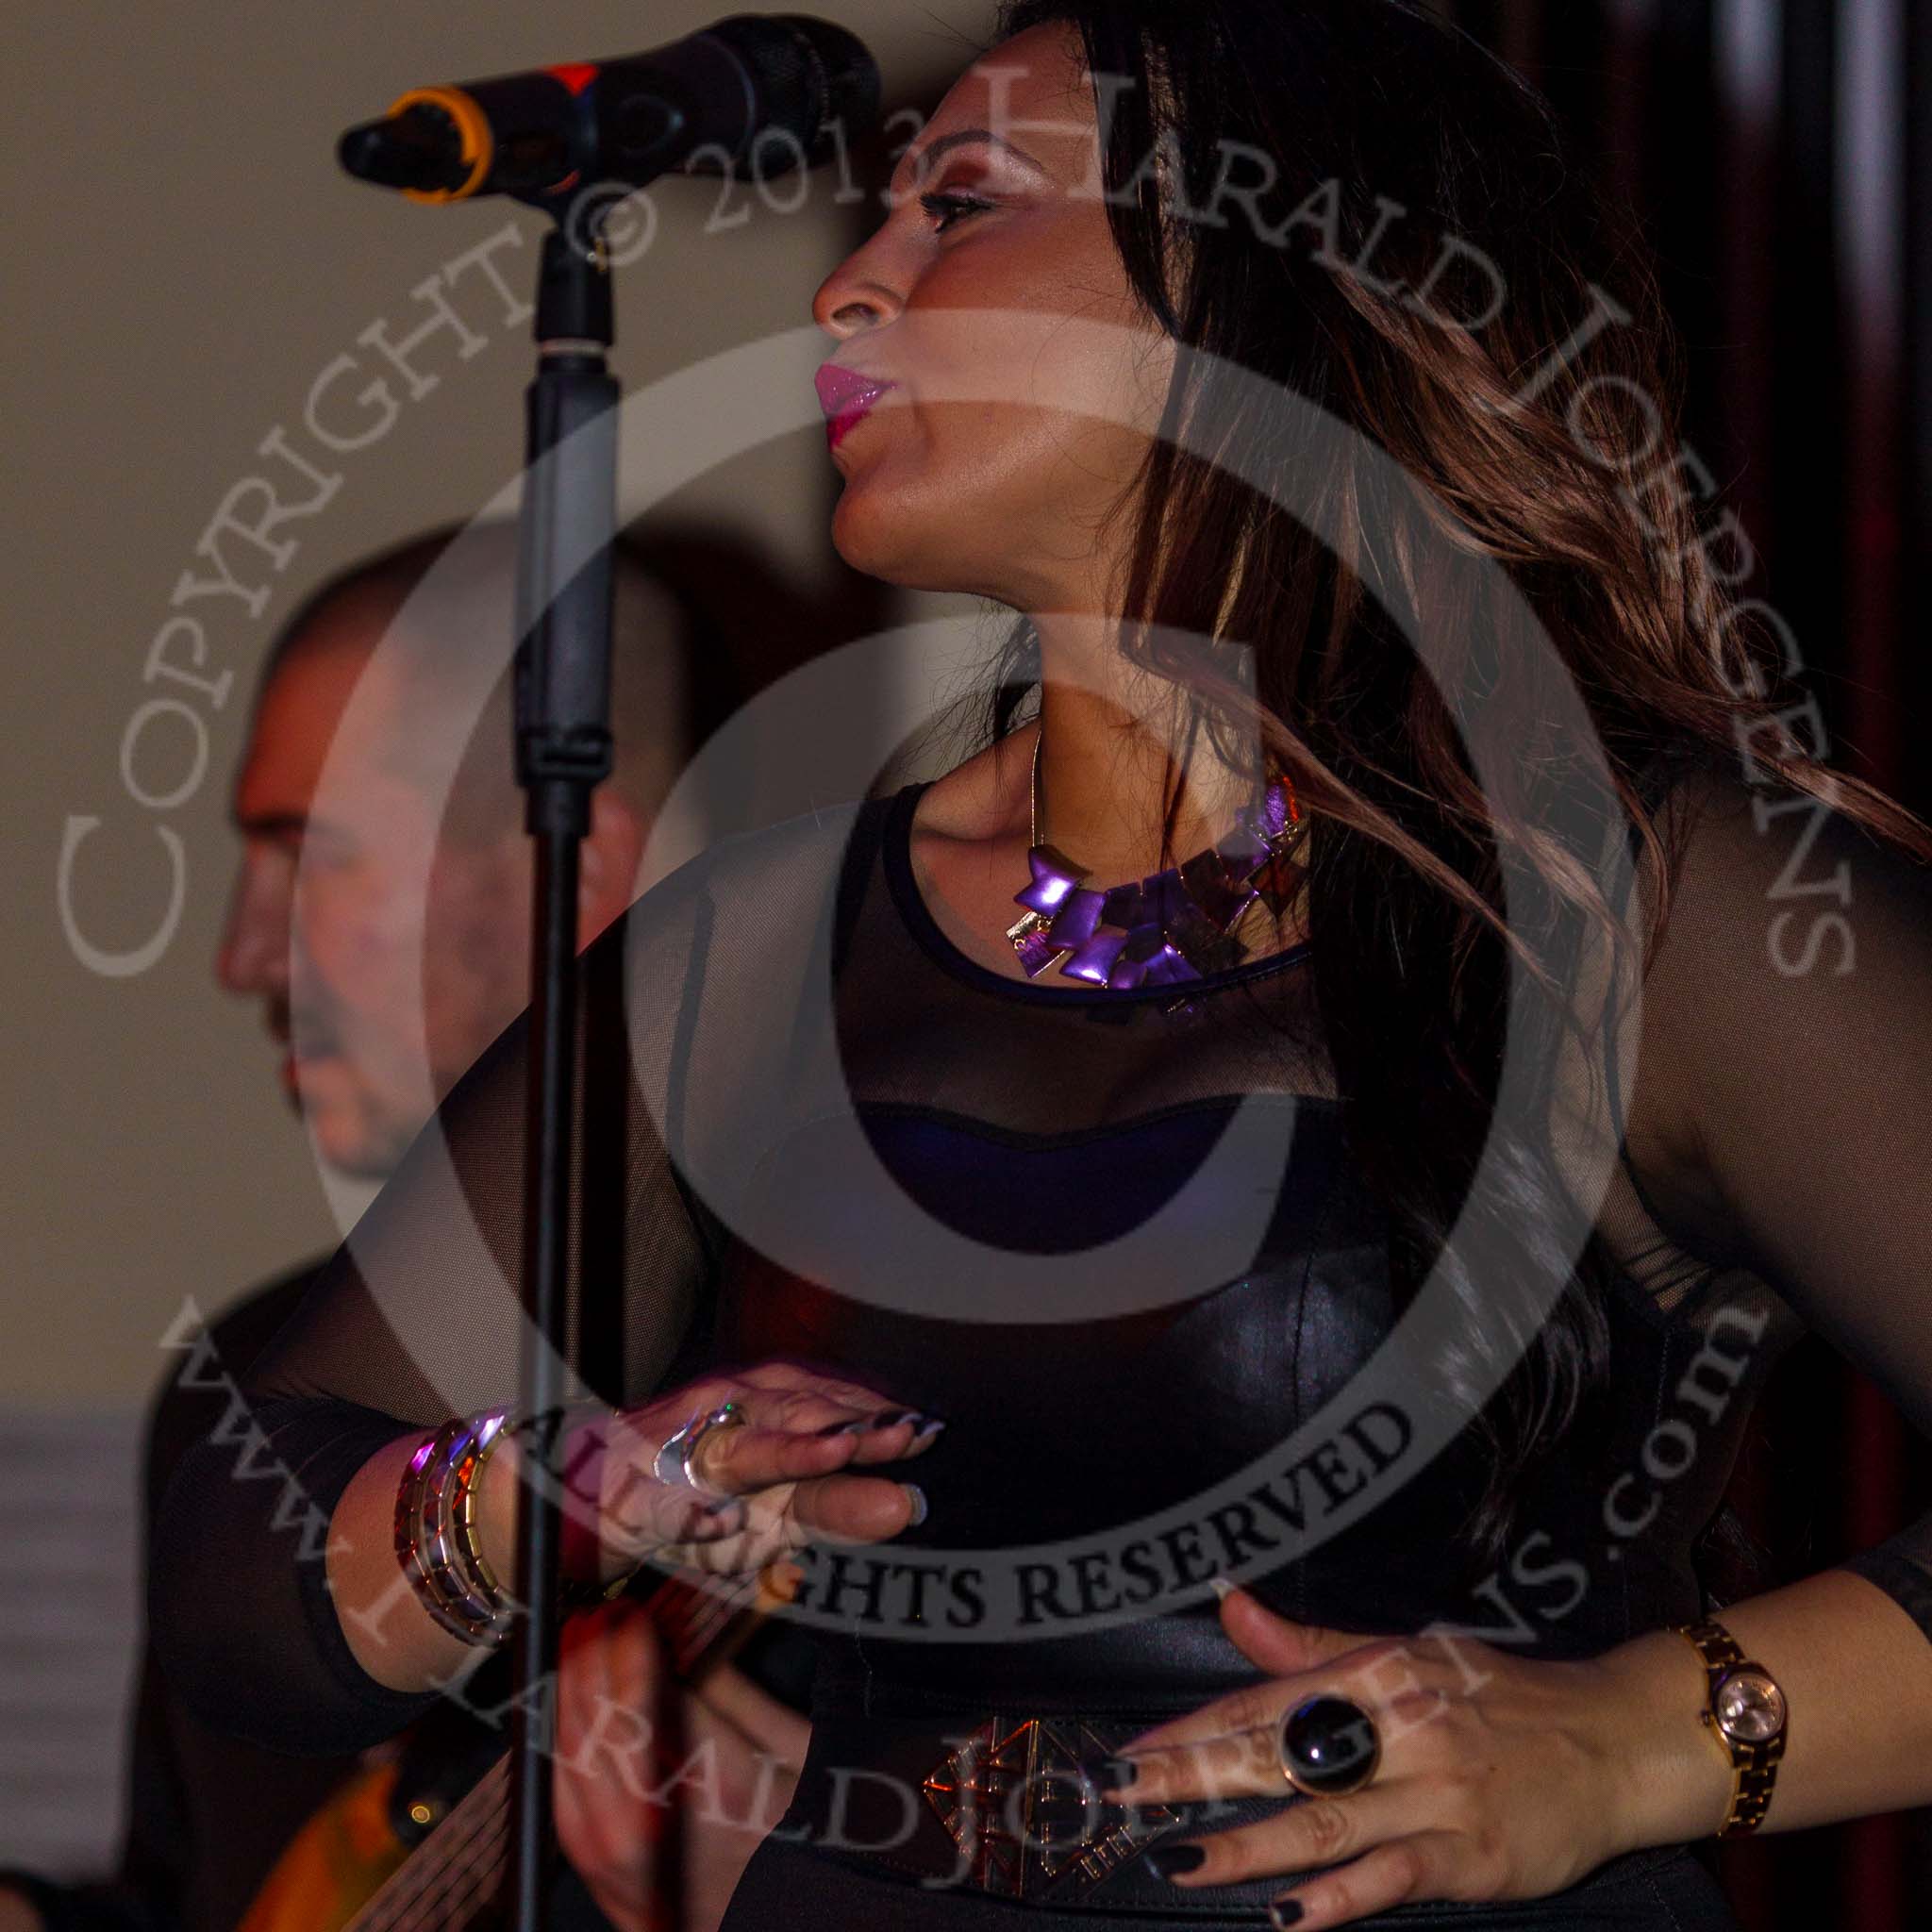 Grand Opening of the DBPC IXL Event Centre: Kym Mazelle & the Urban Blues Band - Michelle J - backing vocals..
Dallas Burston Polo Club, Stoneythorpe Estate,
Southam,
Warwickshire,
United Kingdom,
on 05 December 2013 at 21:48, image #201